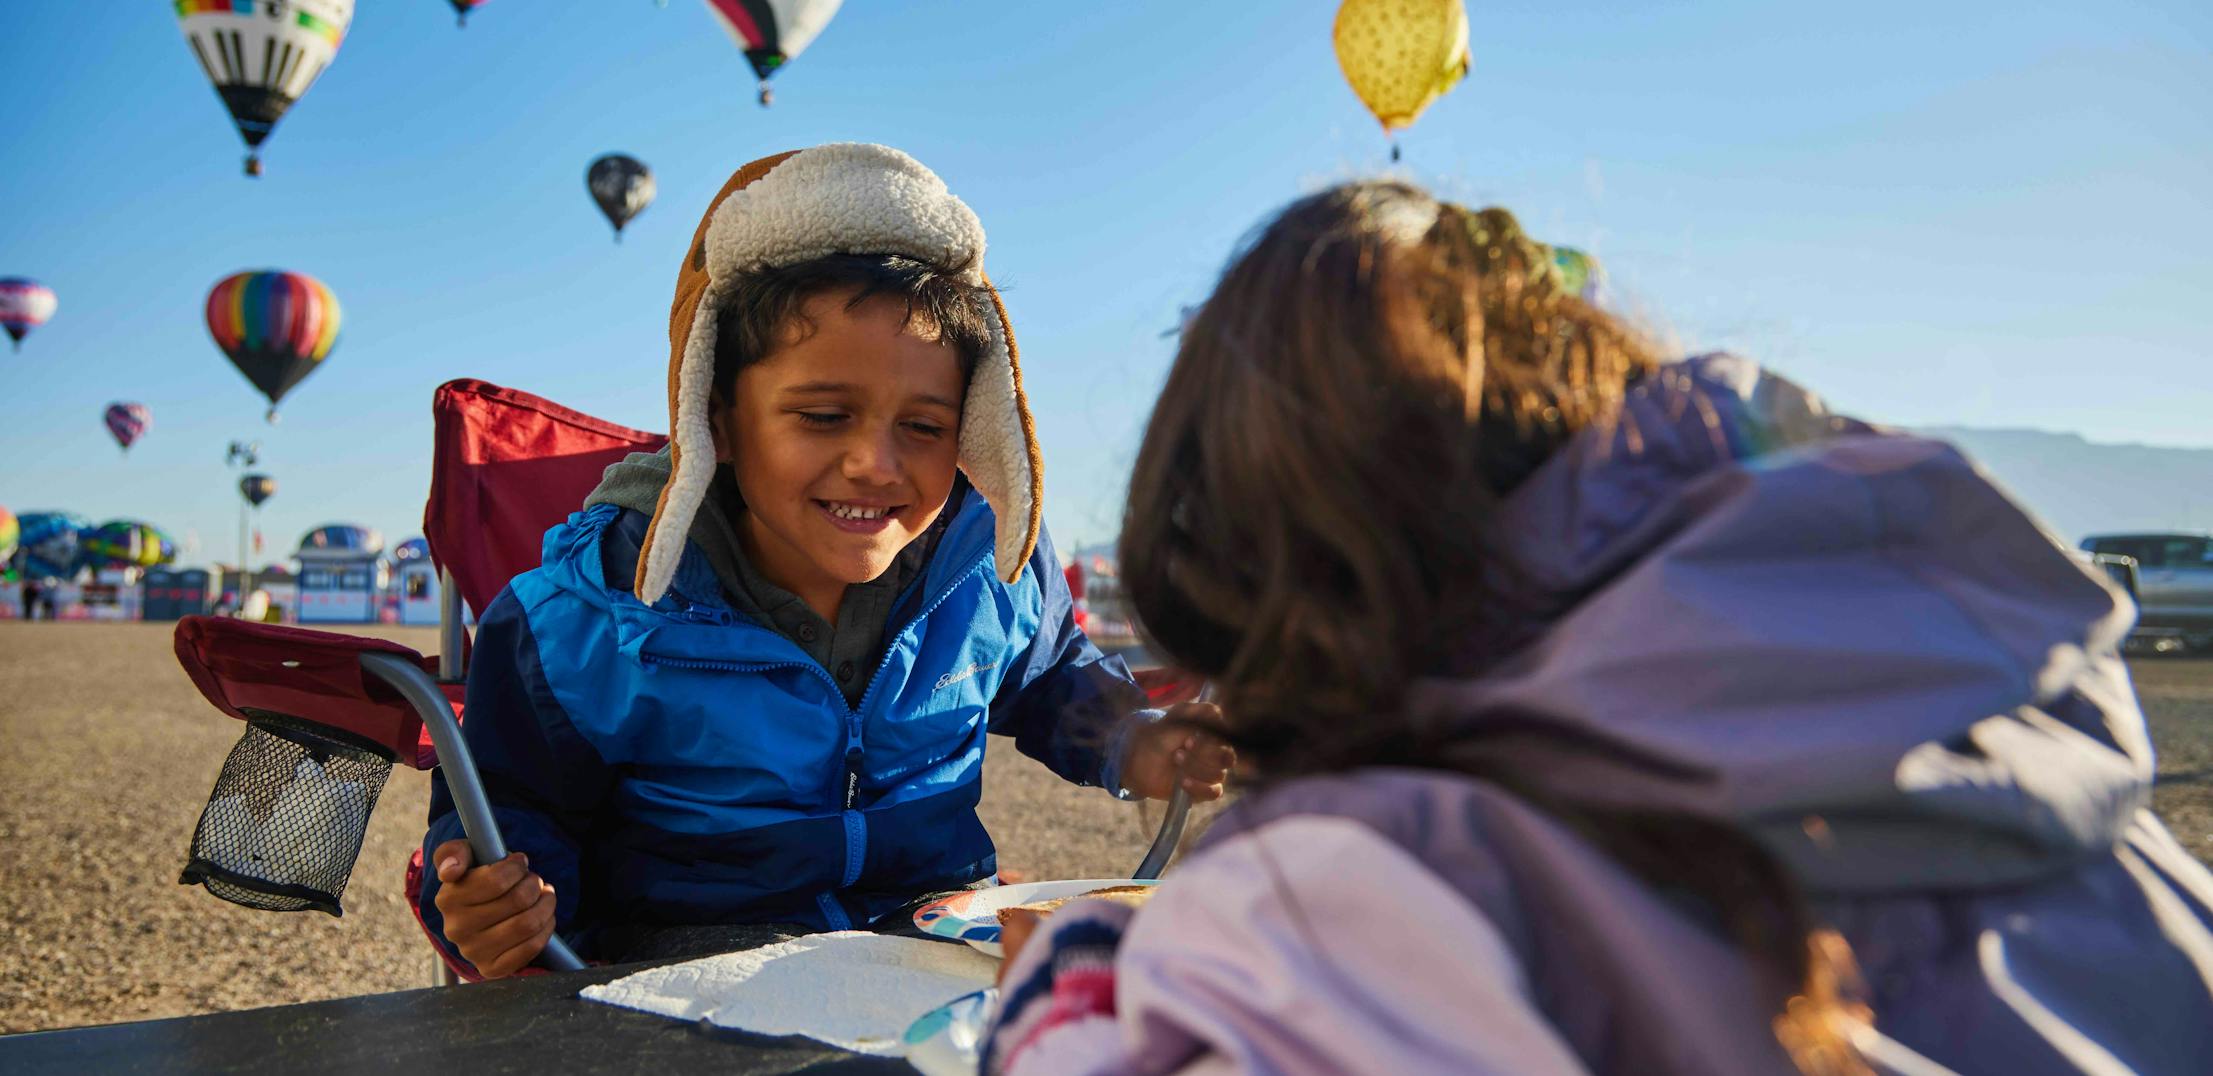 Brian and Surna Barton's kids sitting at a table and eating a snack while at the Albuquerque Balloon Fiesta